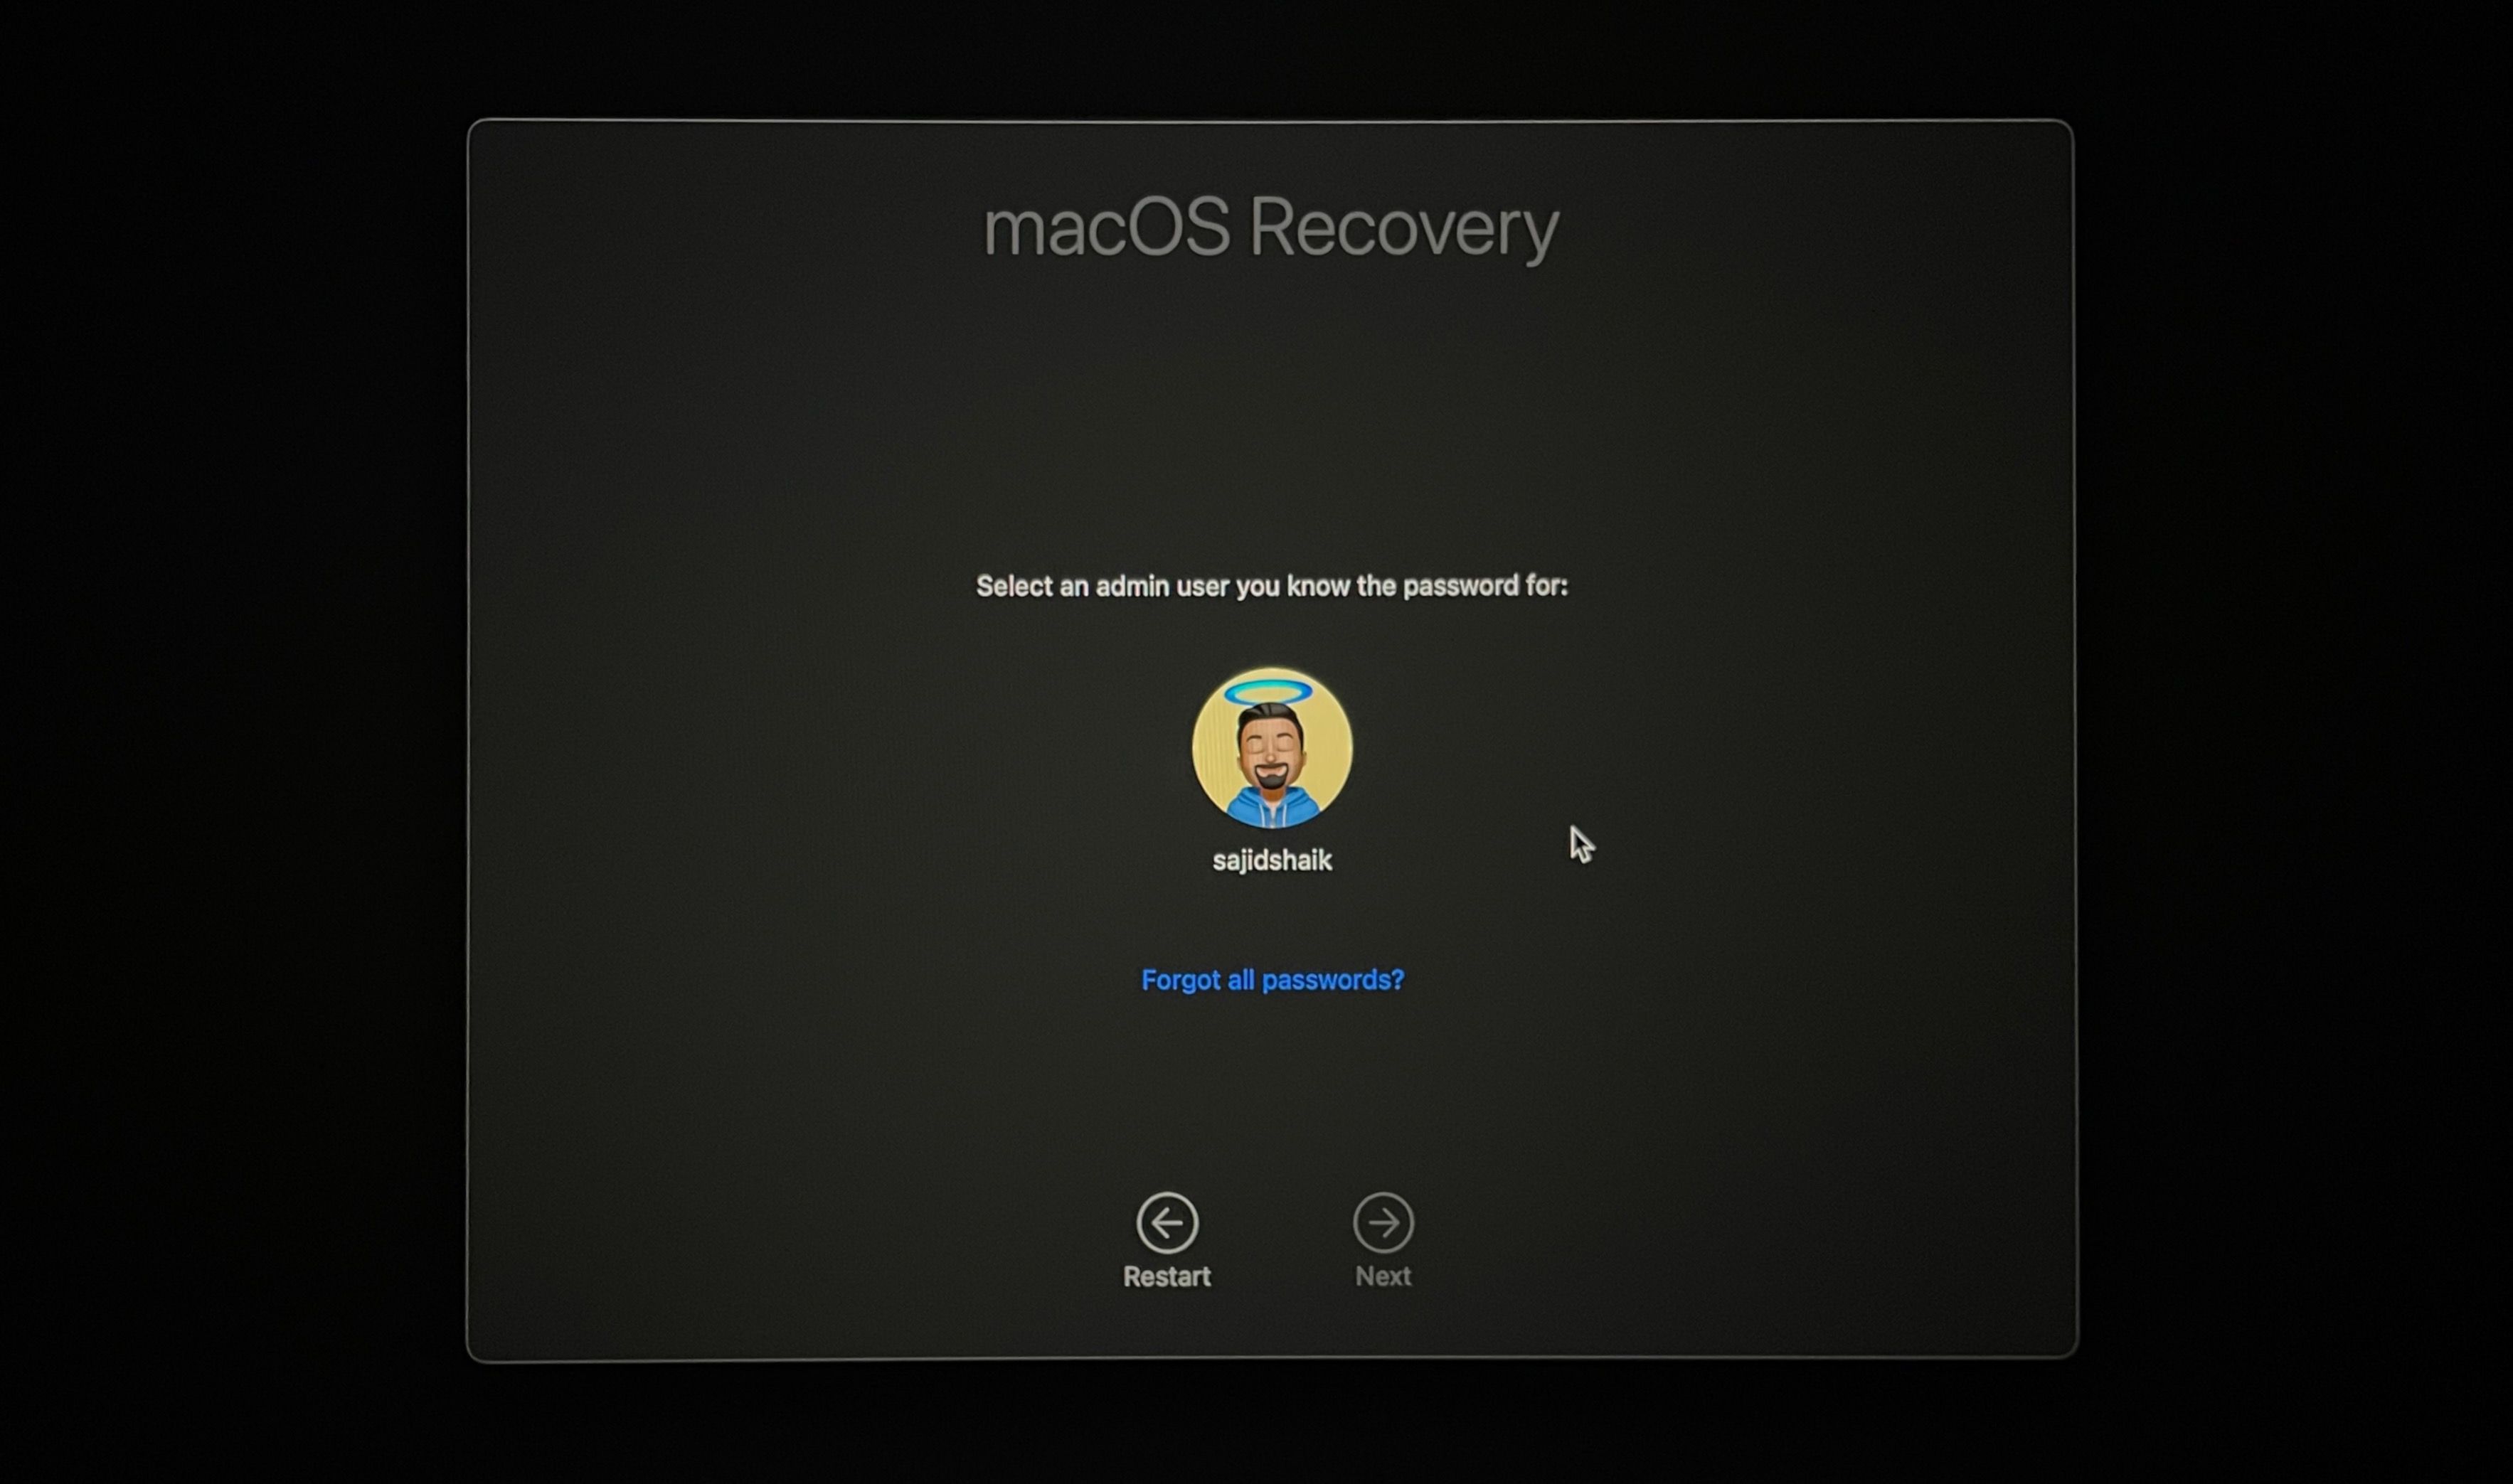 Select the admin account in macOS Recovery and enter your password